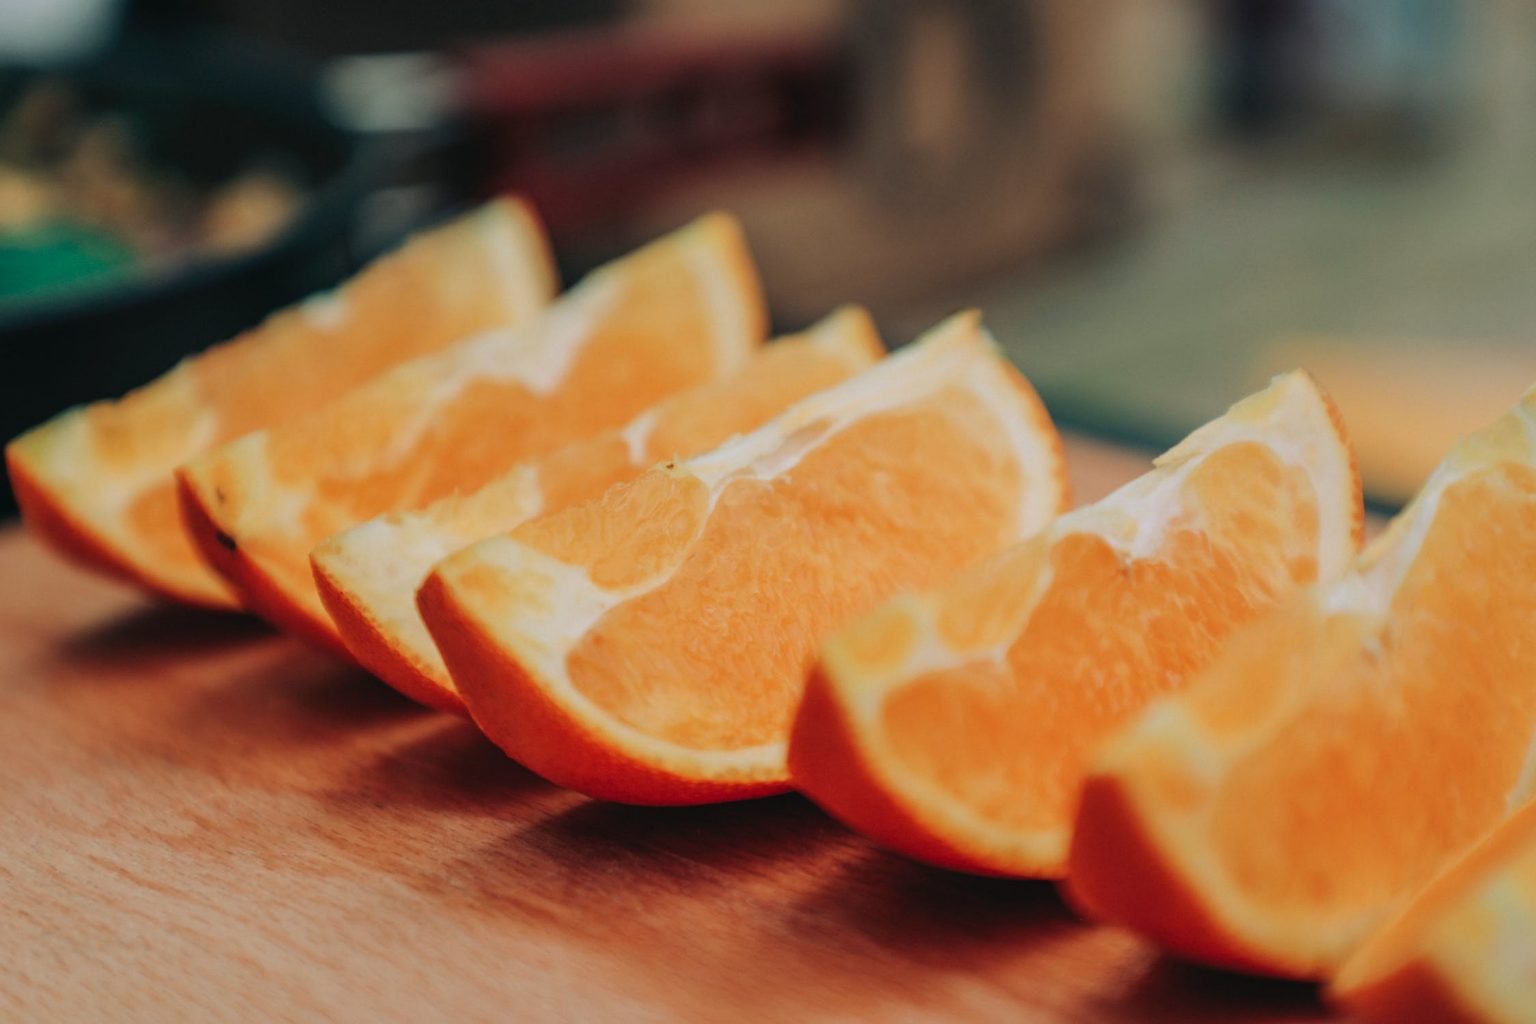 Are Oranges Bad For Arthritis? No, They are Actually Very ...